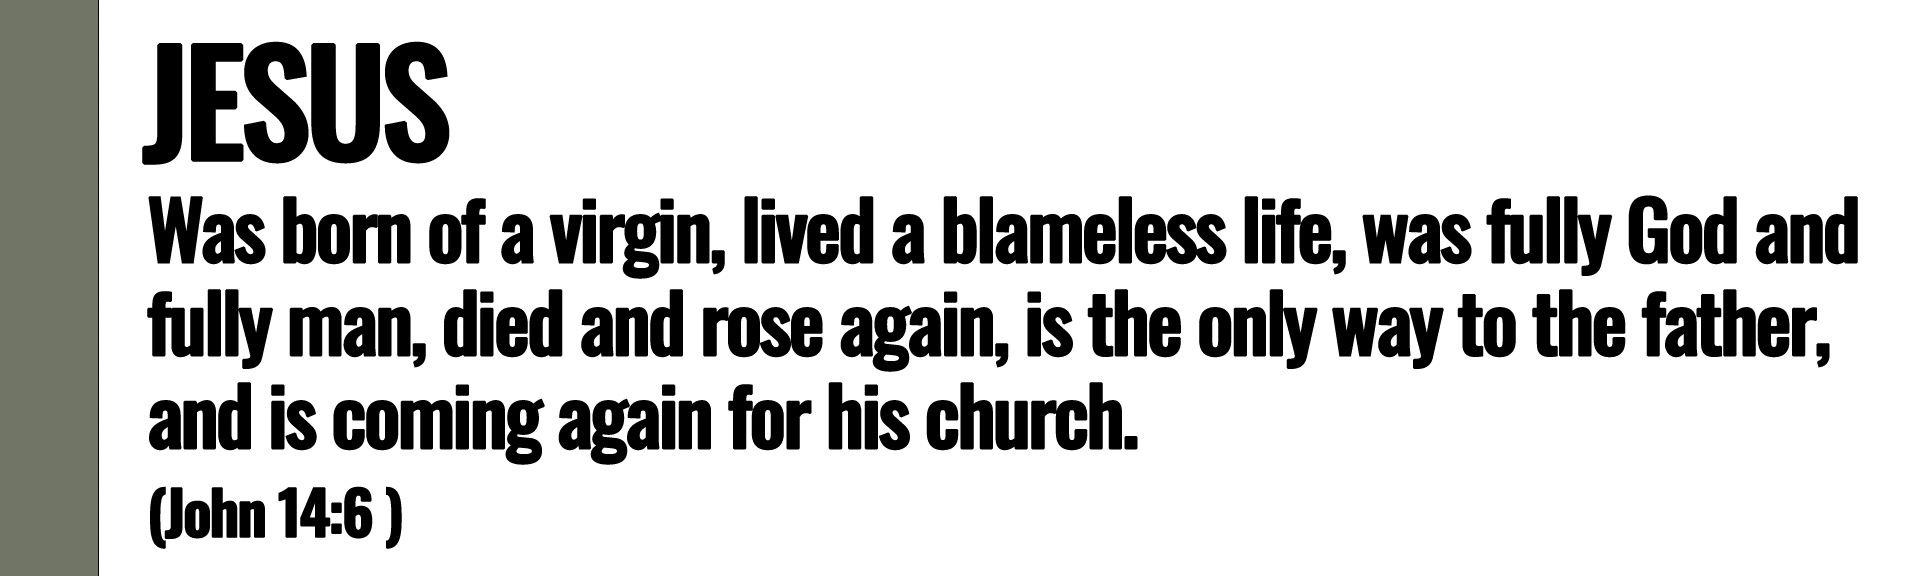 Was born of a virgin, lived a blameless life, was fully God and fully man, died and rose again...